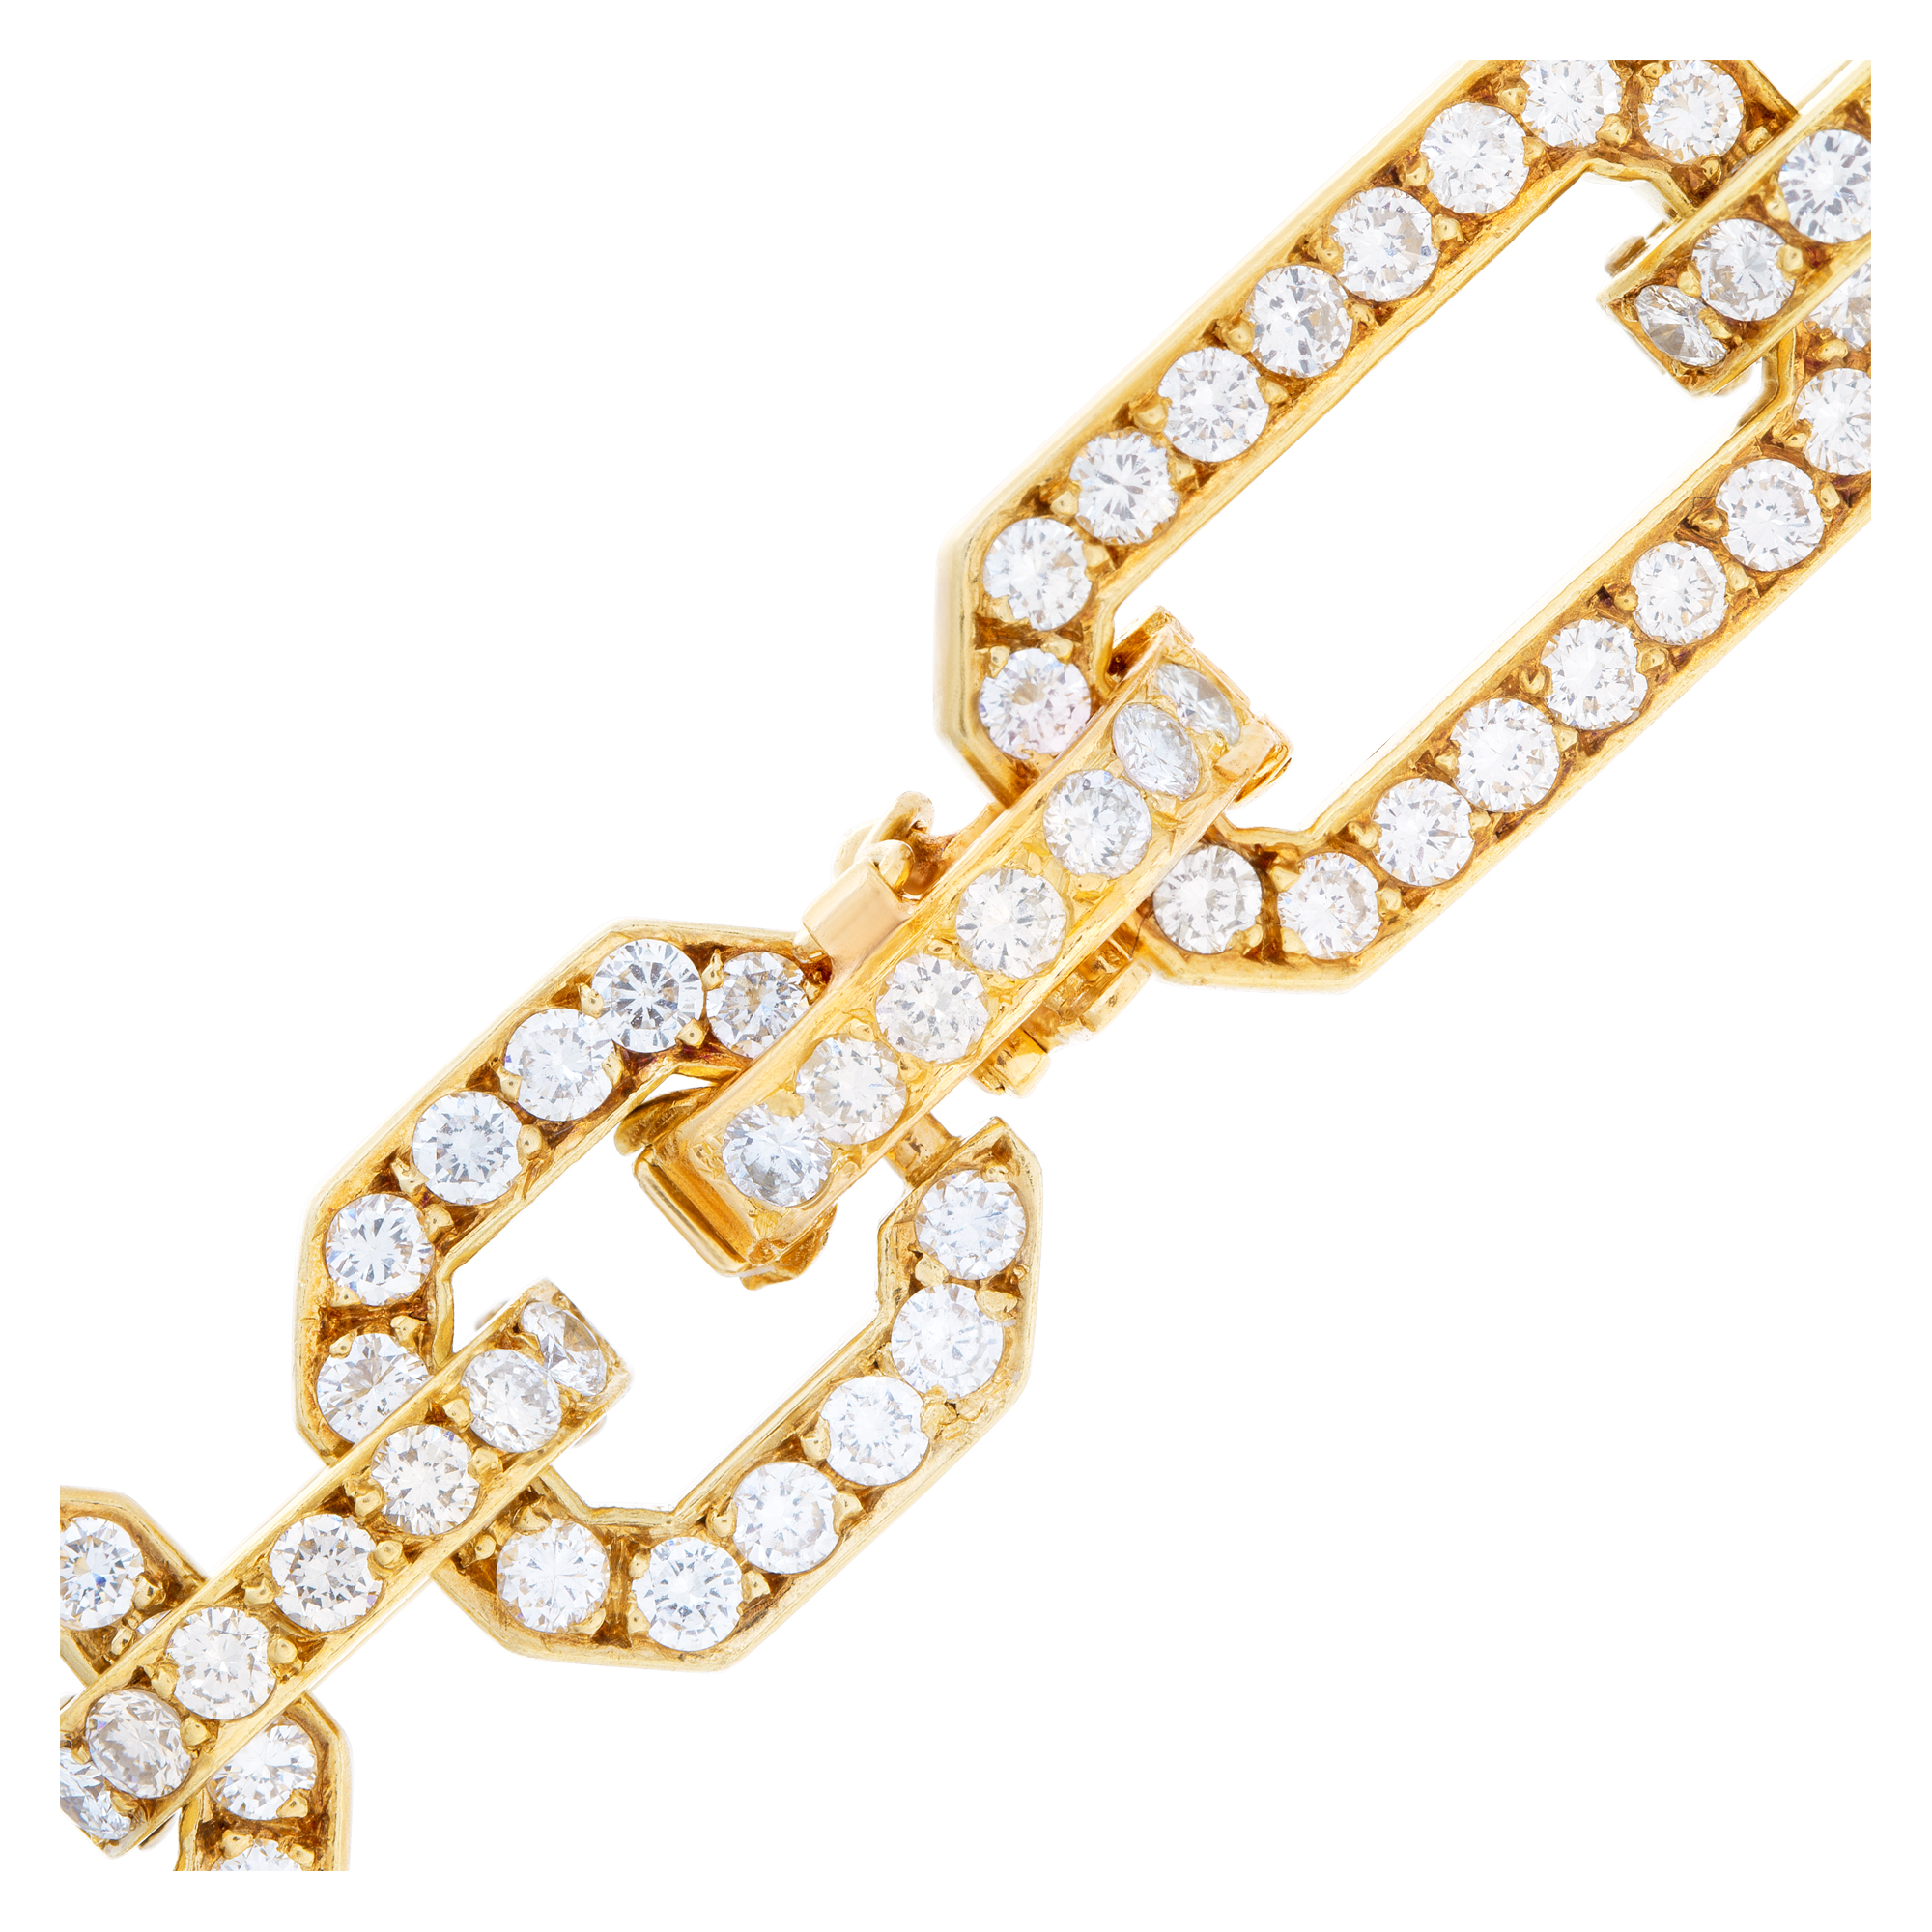 Chain link diamonds necklace set in 18K yellow gold with over 16 carats full round brilliant and baguette cut diamonds.15 inches. image 2